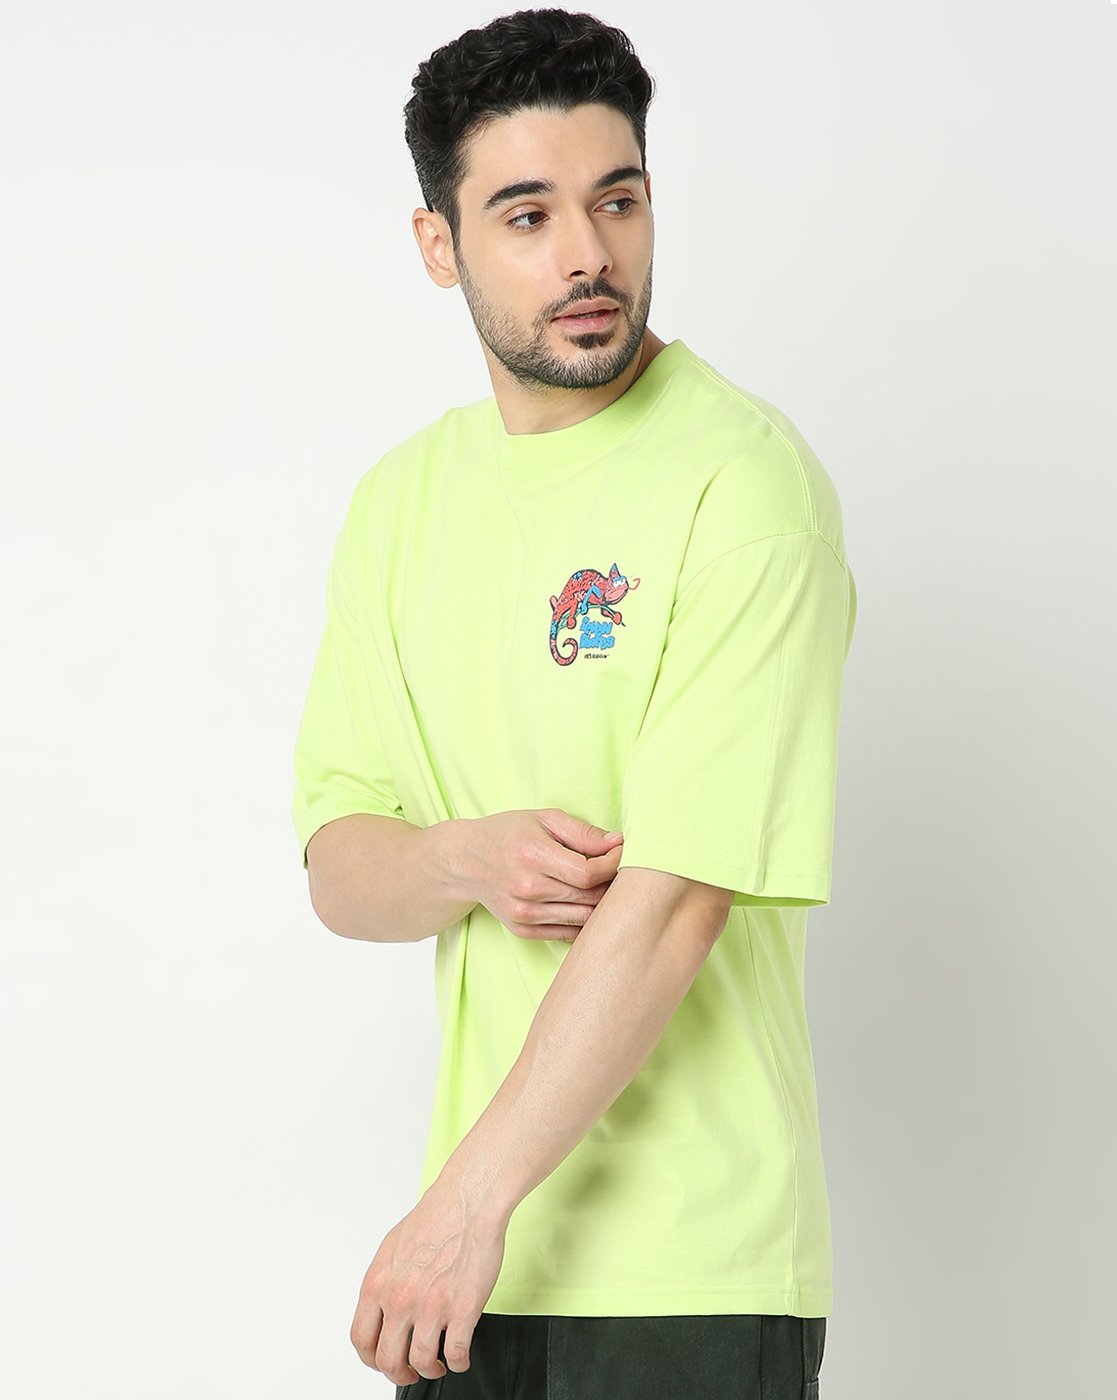 7Shores Green Reptile Printed Oversized Tshirt